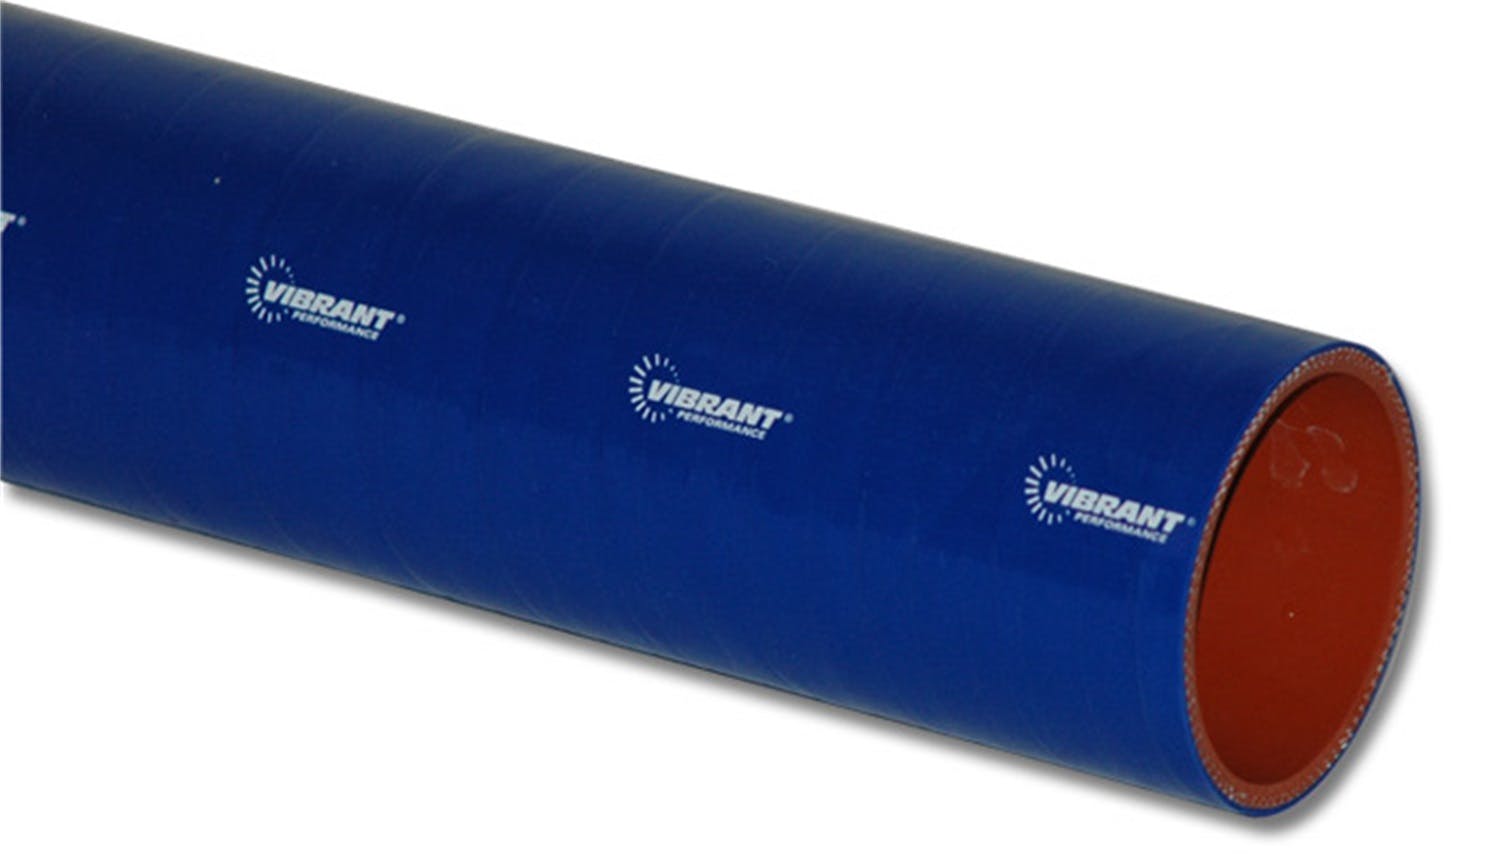 Vibrant Performance 27151B 4 Ply Silicone Sleeve, 3 inch I.D. x 12 inch Long - Blue